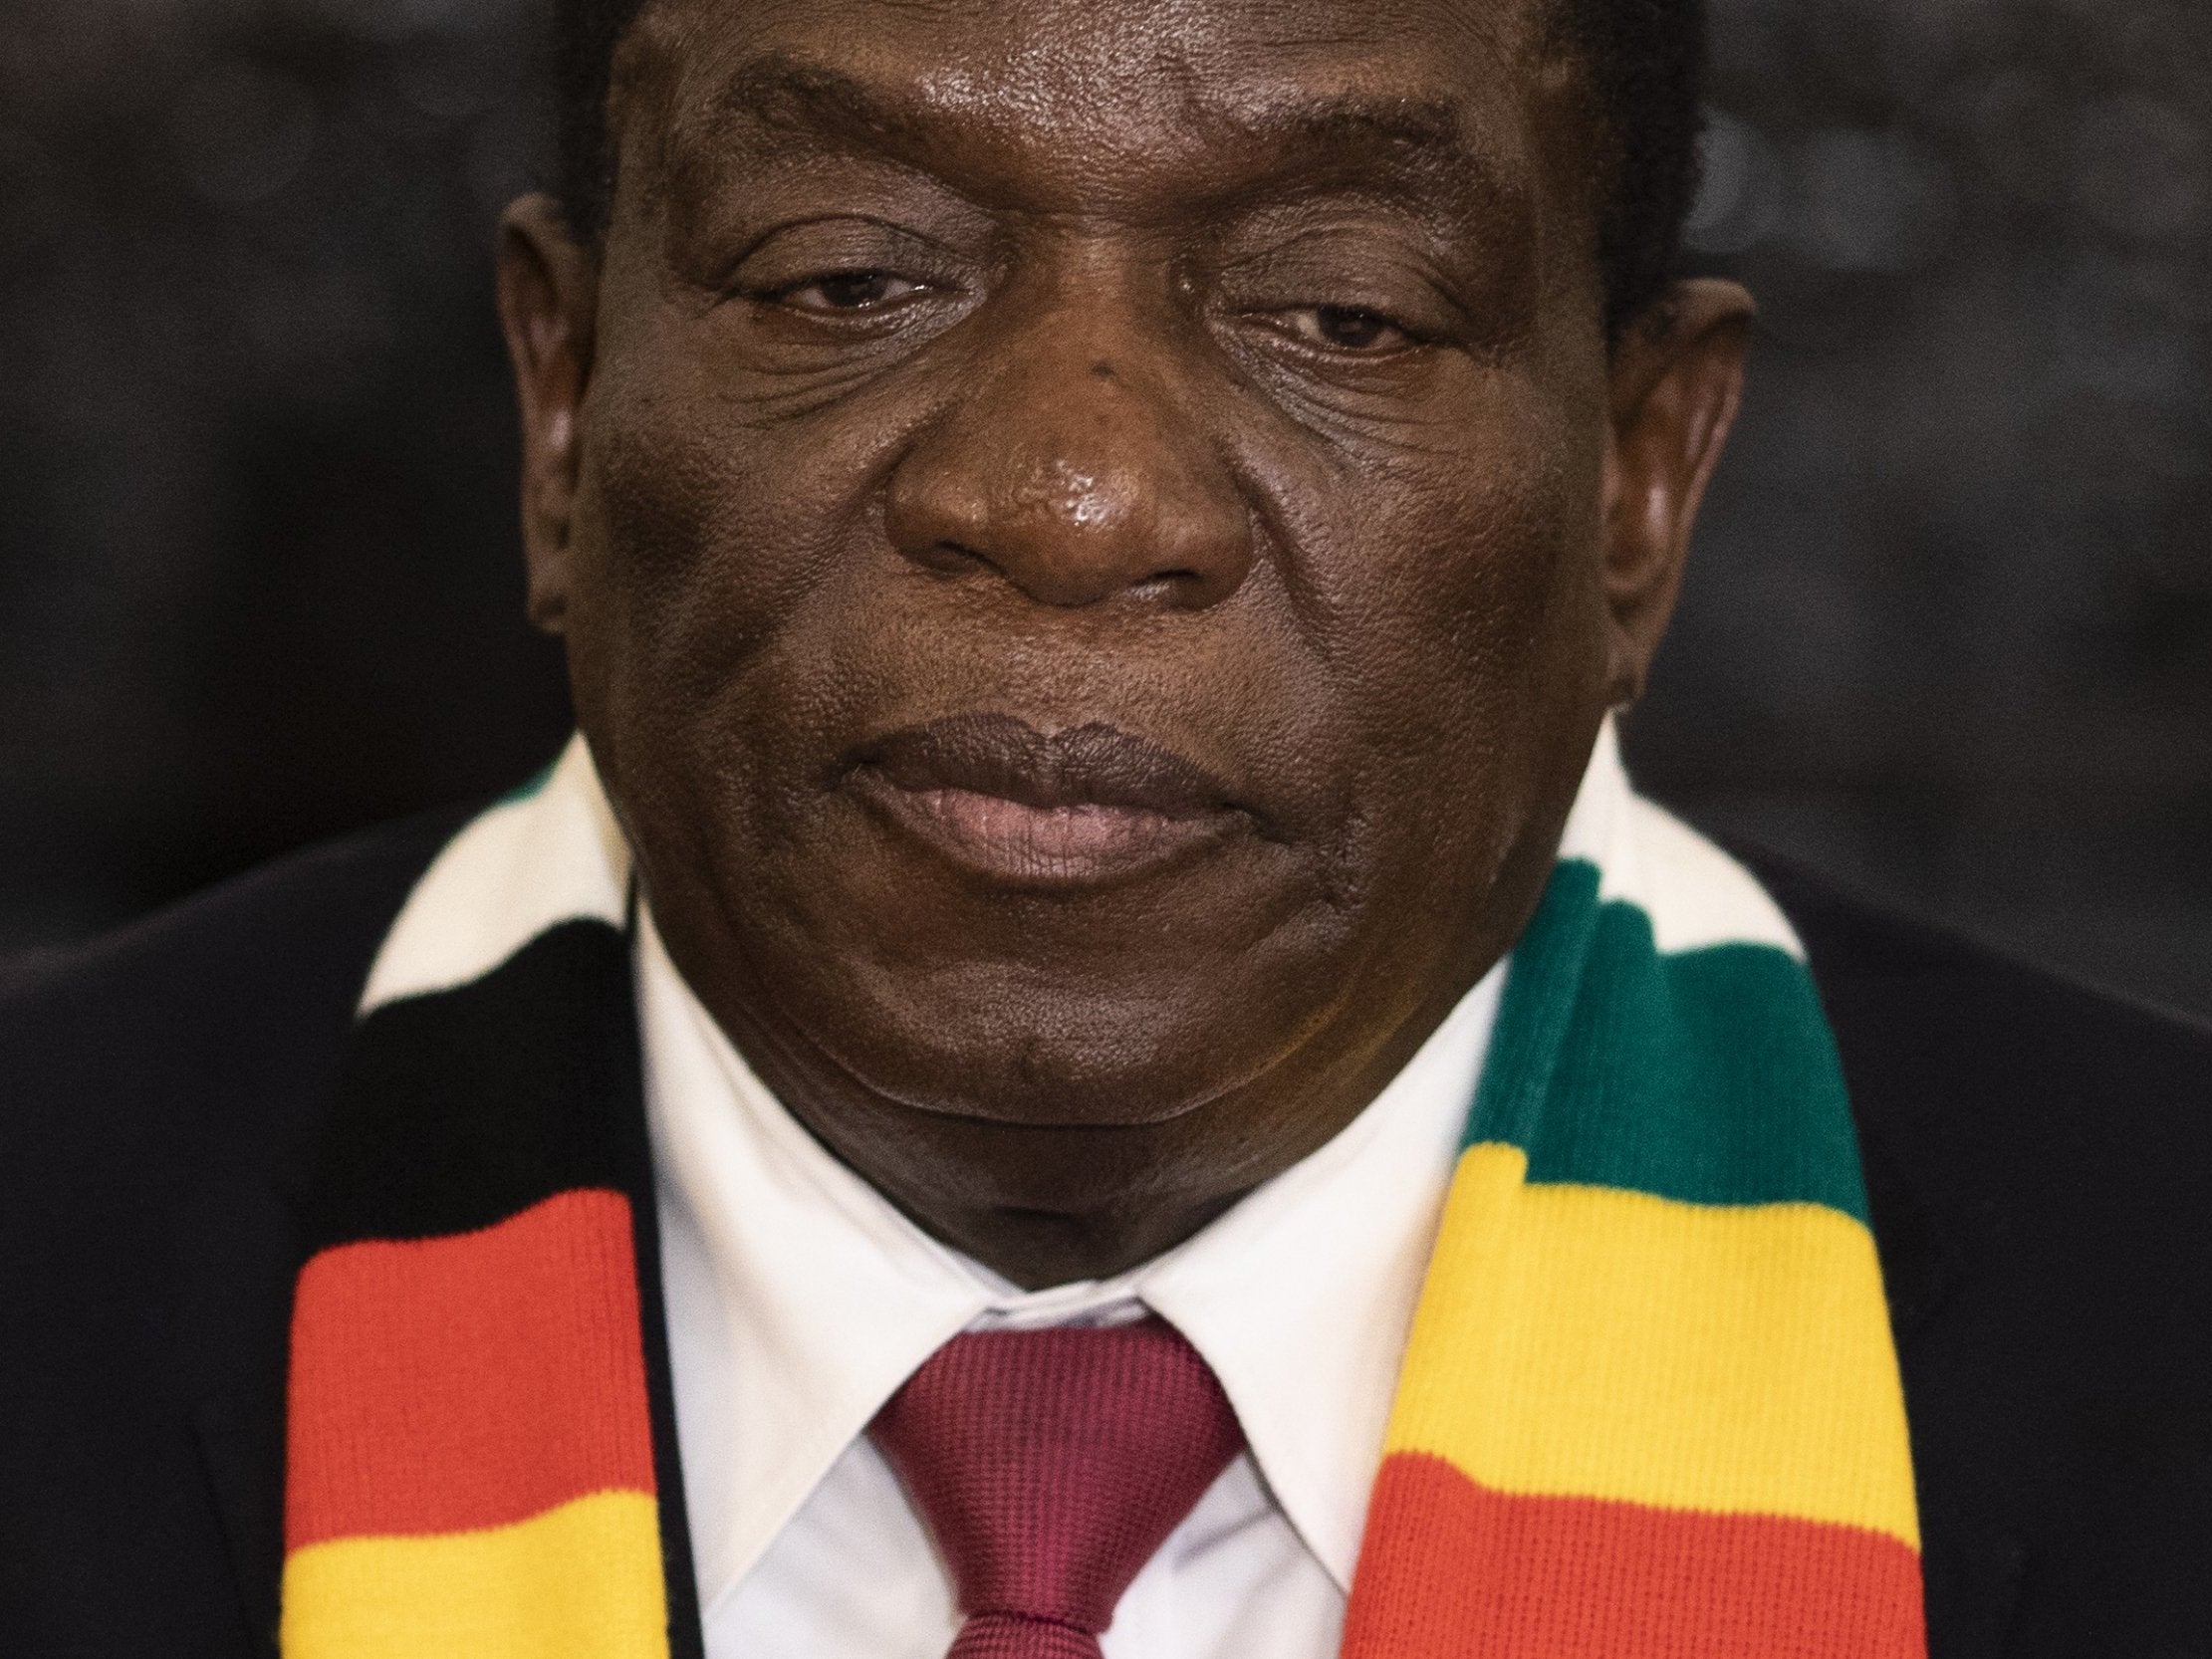 Emmerson Mnangagwa was scheduled to be inaugurated on Sunday